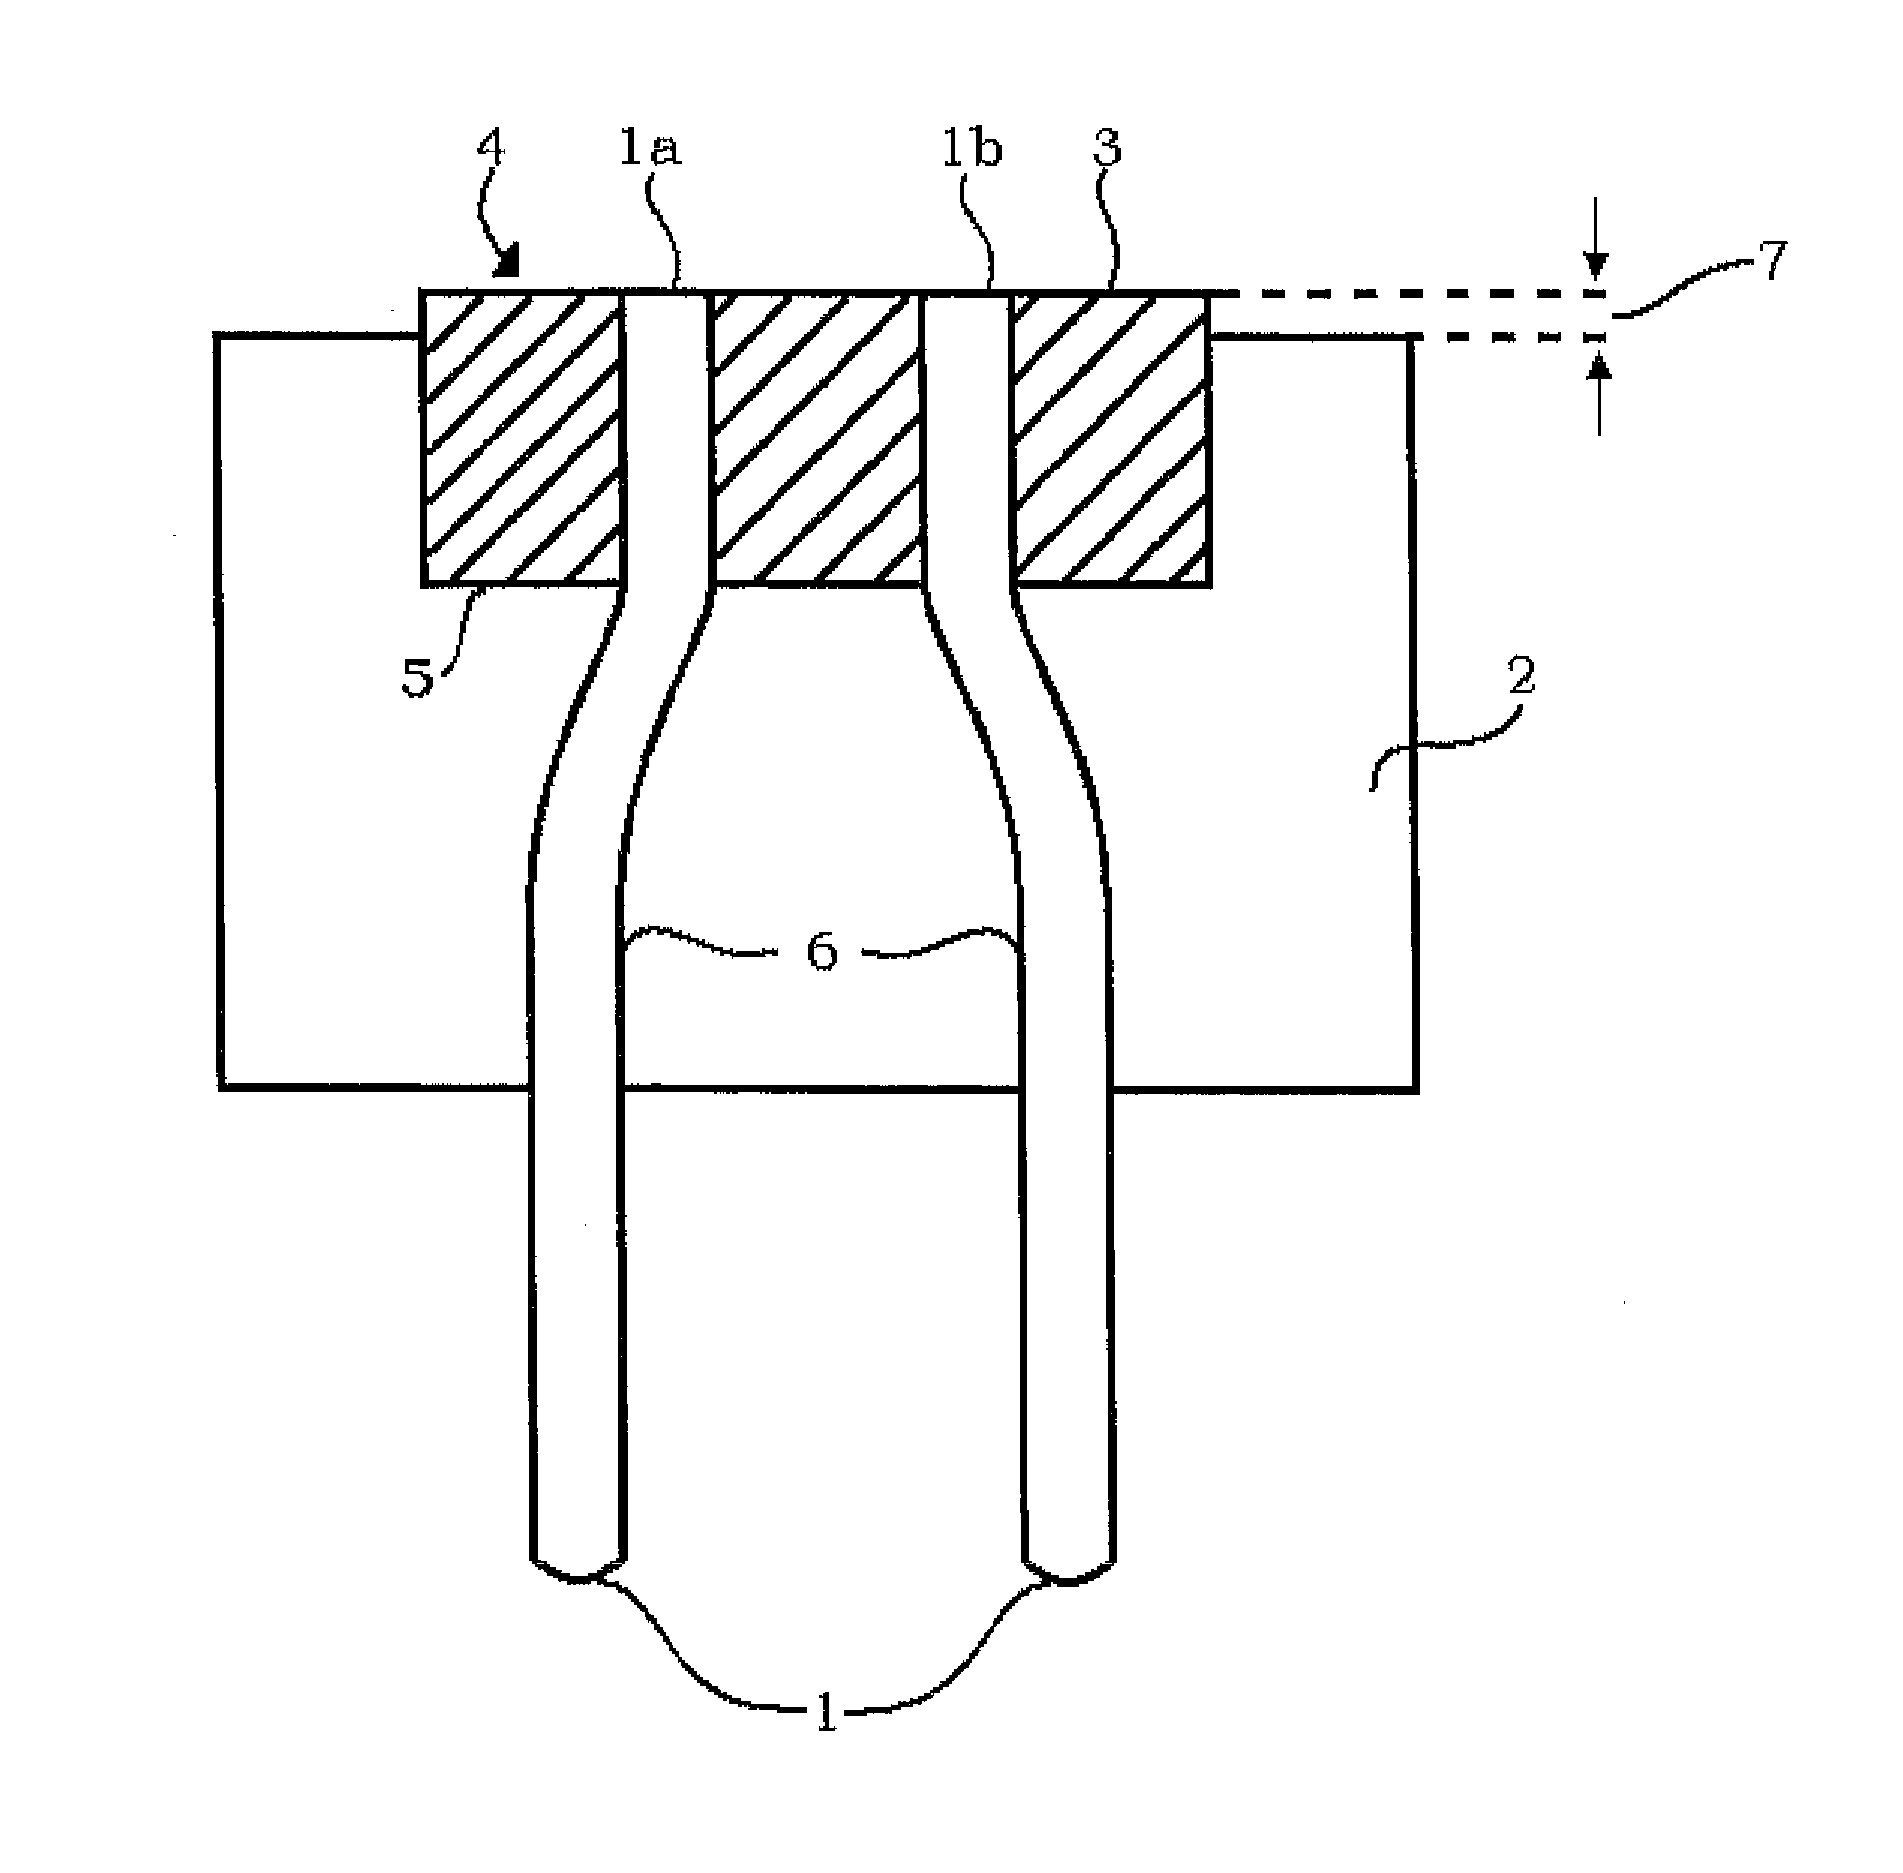 Igniter base for pyrotechnic devices